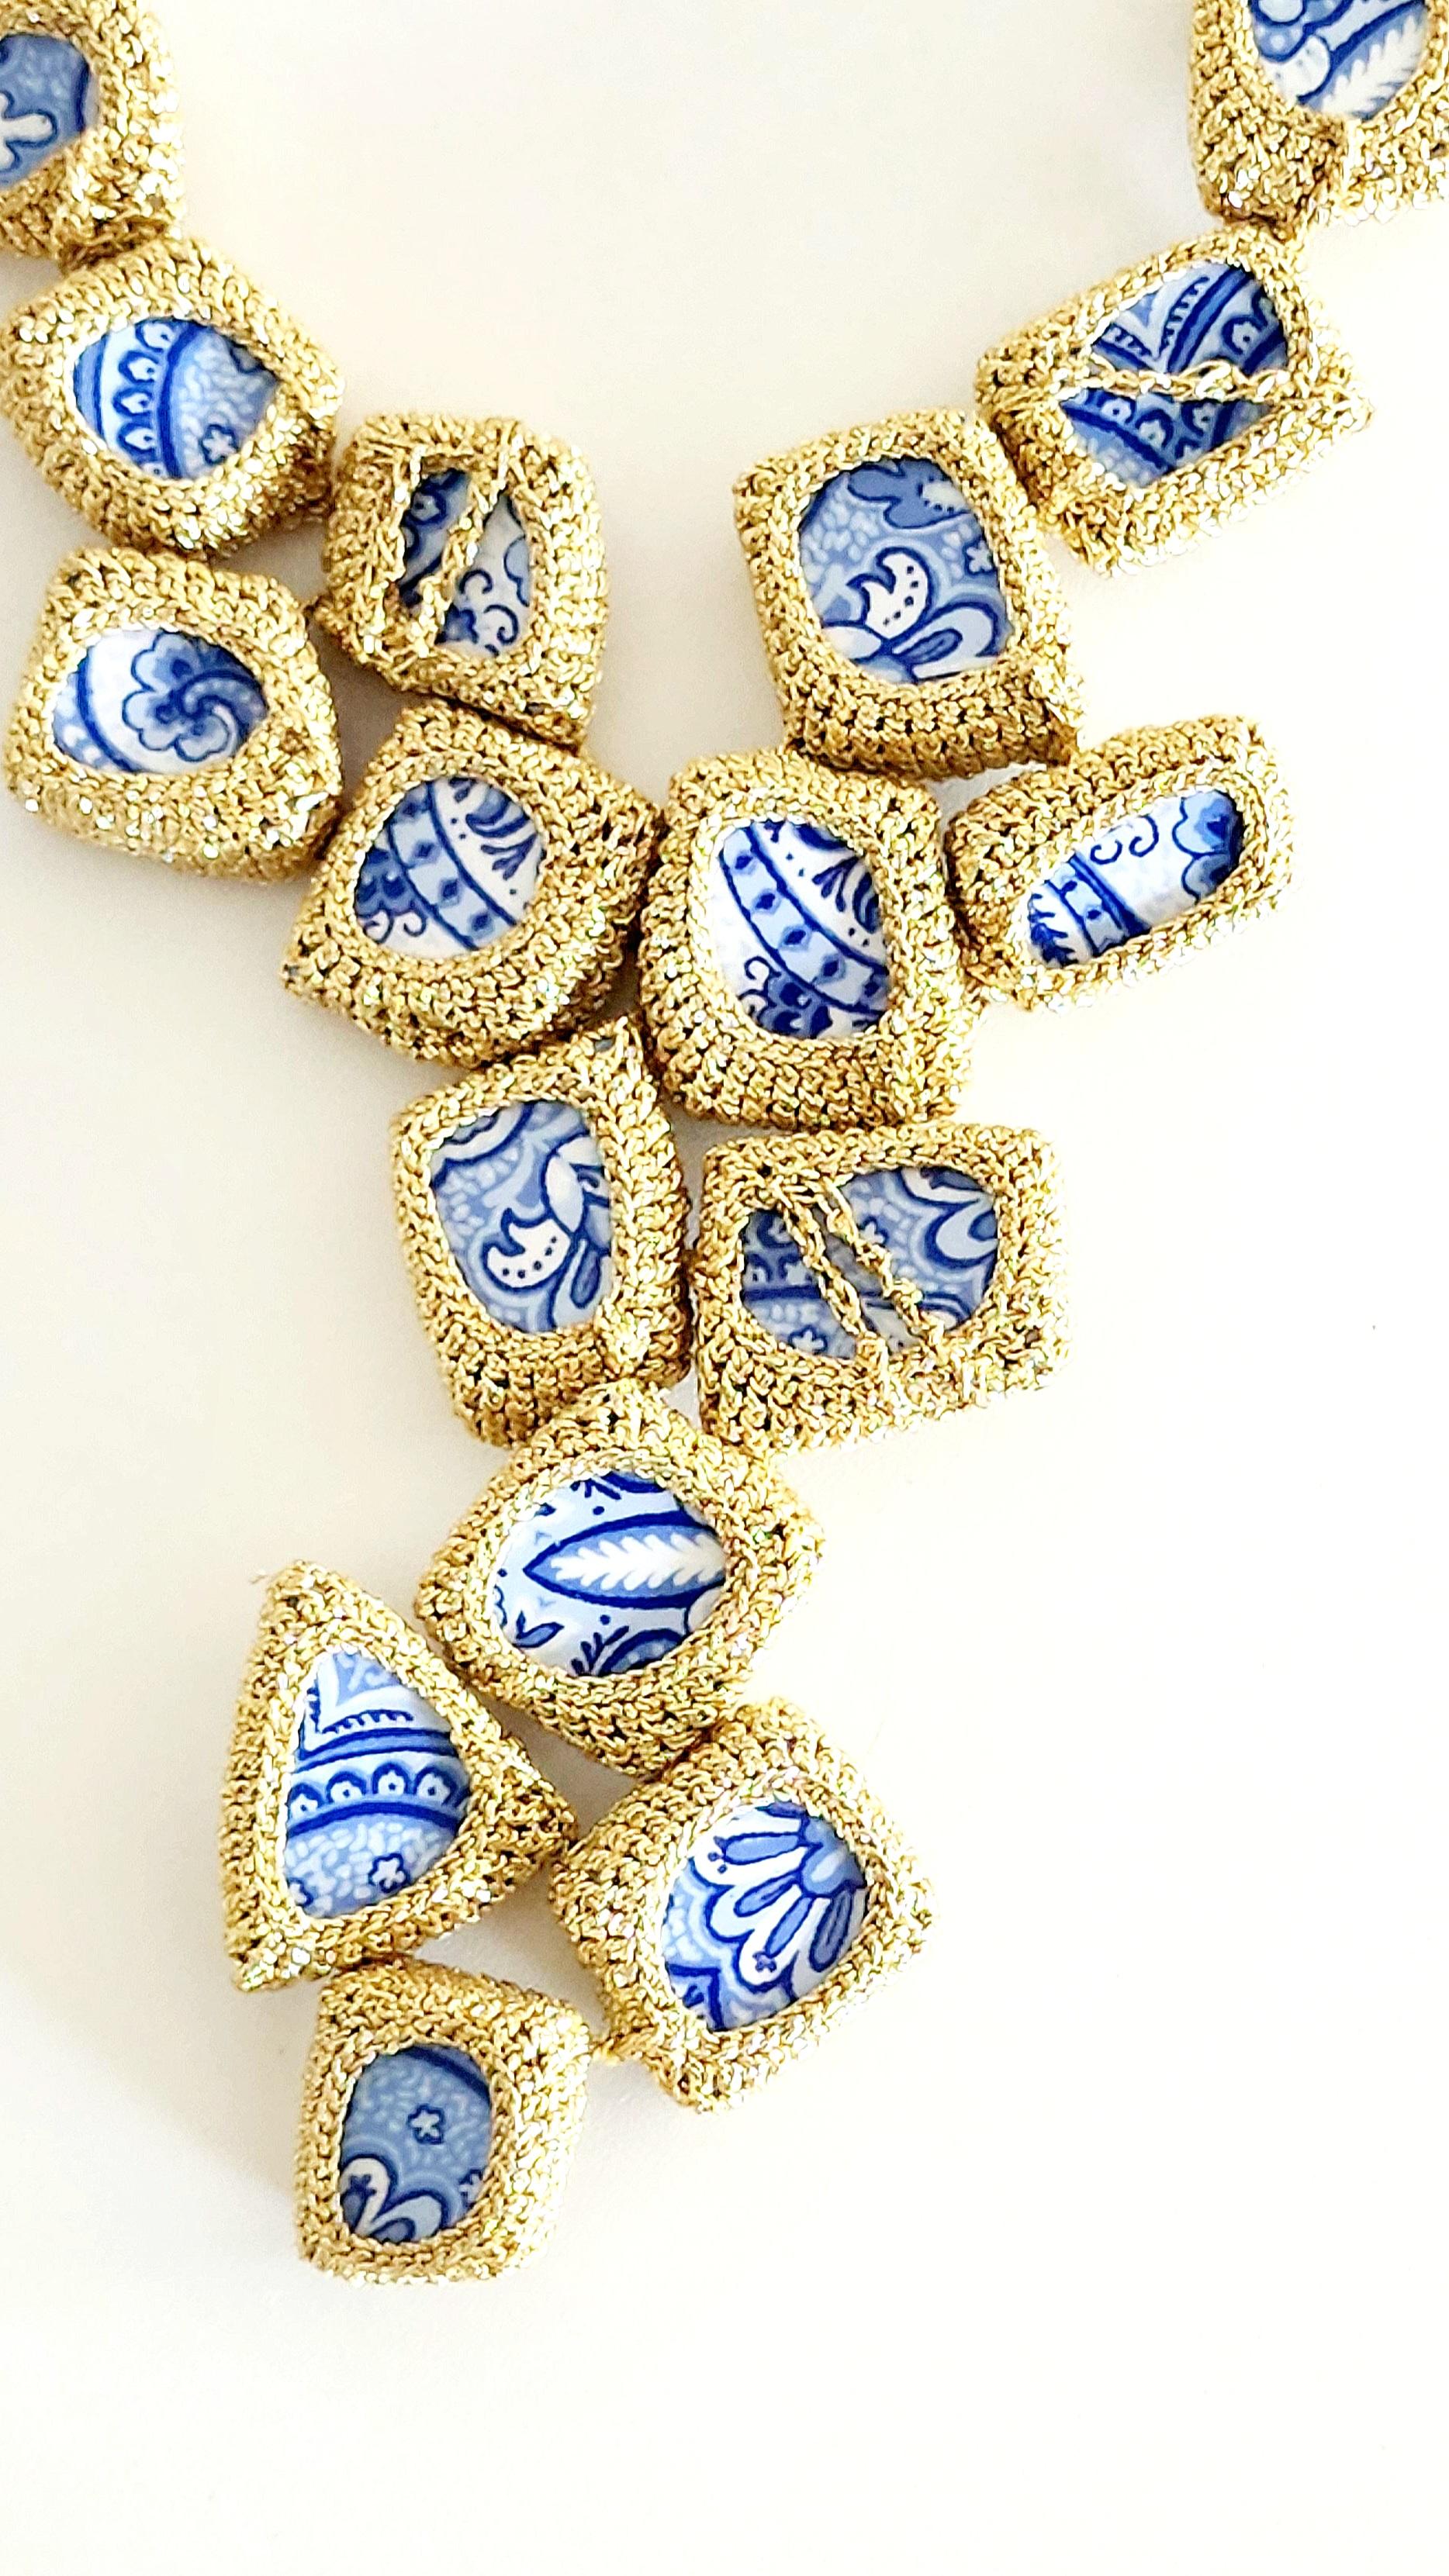 One of a kind blue and white cut ceramics crochet necklace. This necklace is a part of my Kintsugi collection. I had to smooth the sharp edges of each tile and then I crochet it with a golden smooth passing thread. Kintsugi comes from the Japanese